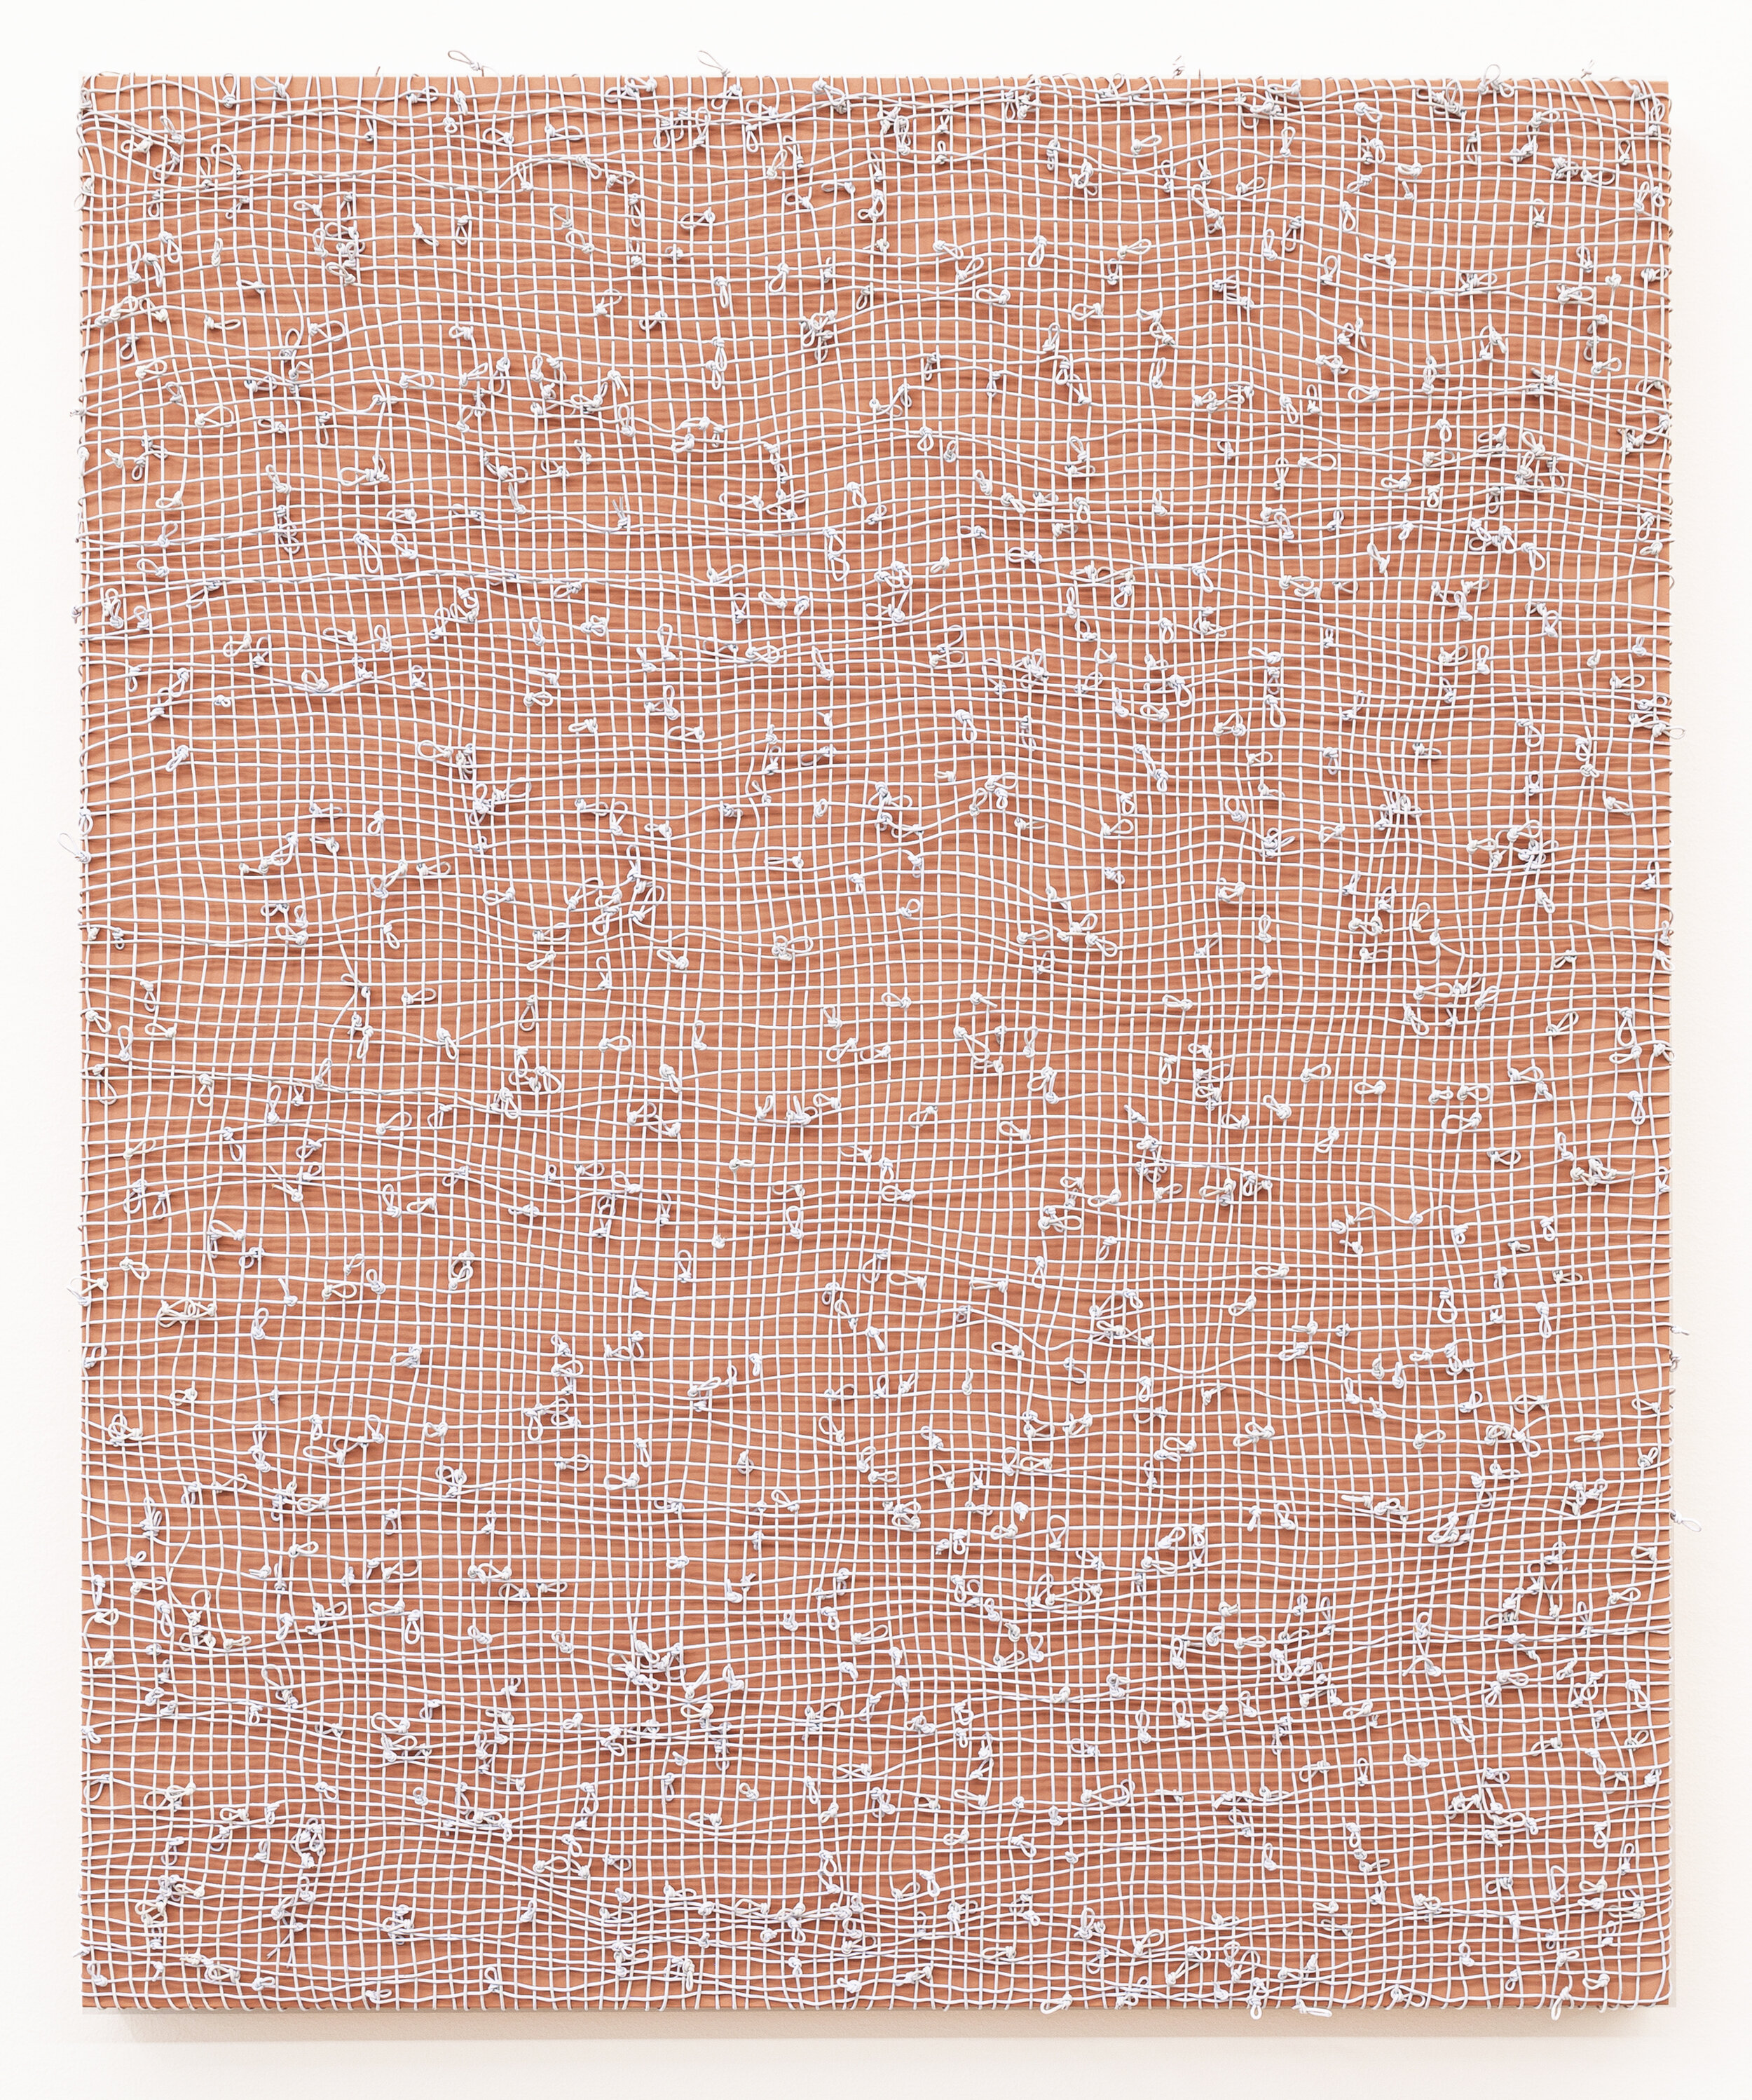 MIMI JUNG | Unsurfaced 3, 34 x 28.25 x 1.5 inches / 86 x 72 x 4 cm, painted cords and painted plywood, framed, 2020